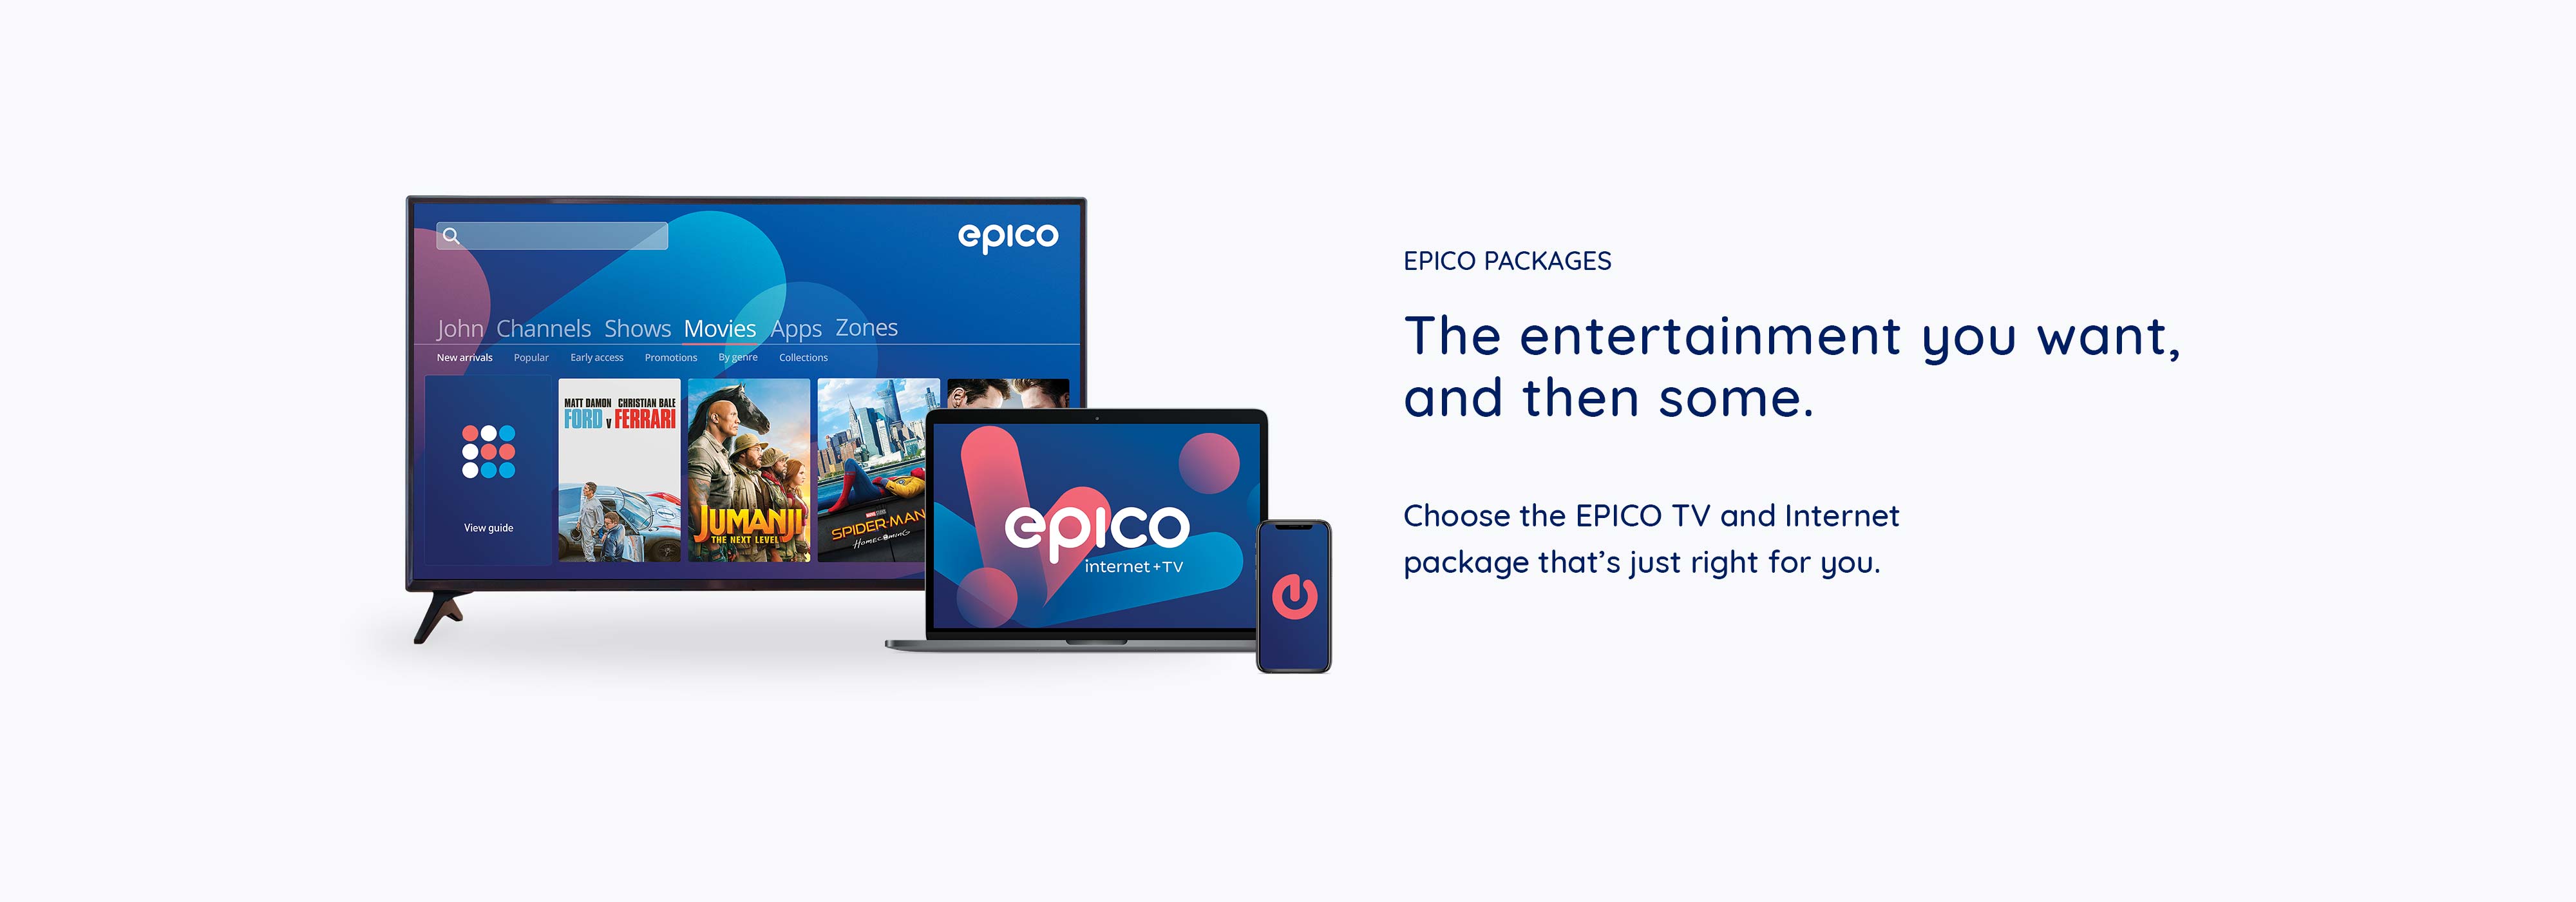 EPICO packages The entertainment you want, and then some.  Choose the EPICO TV and Internet package that’s just right for you.